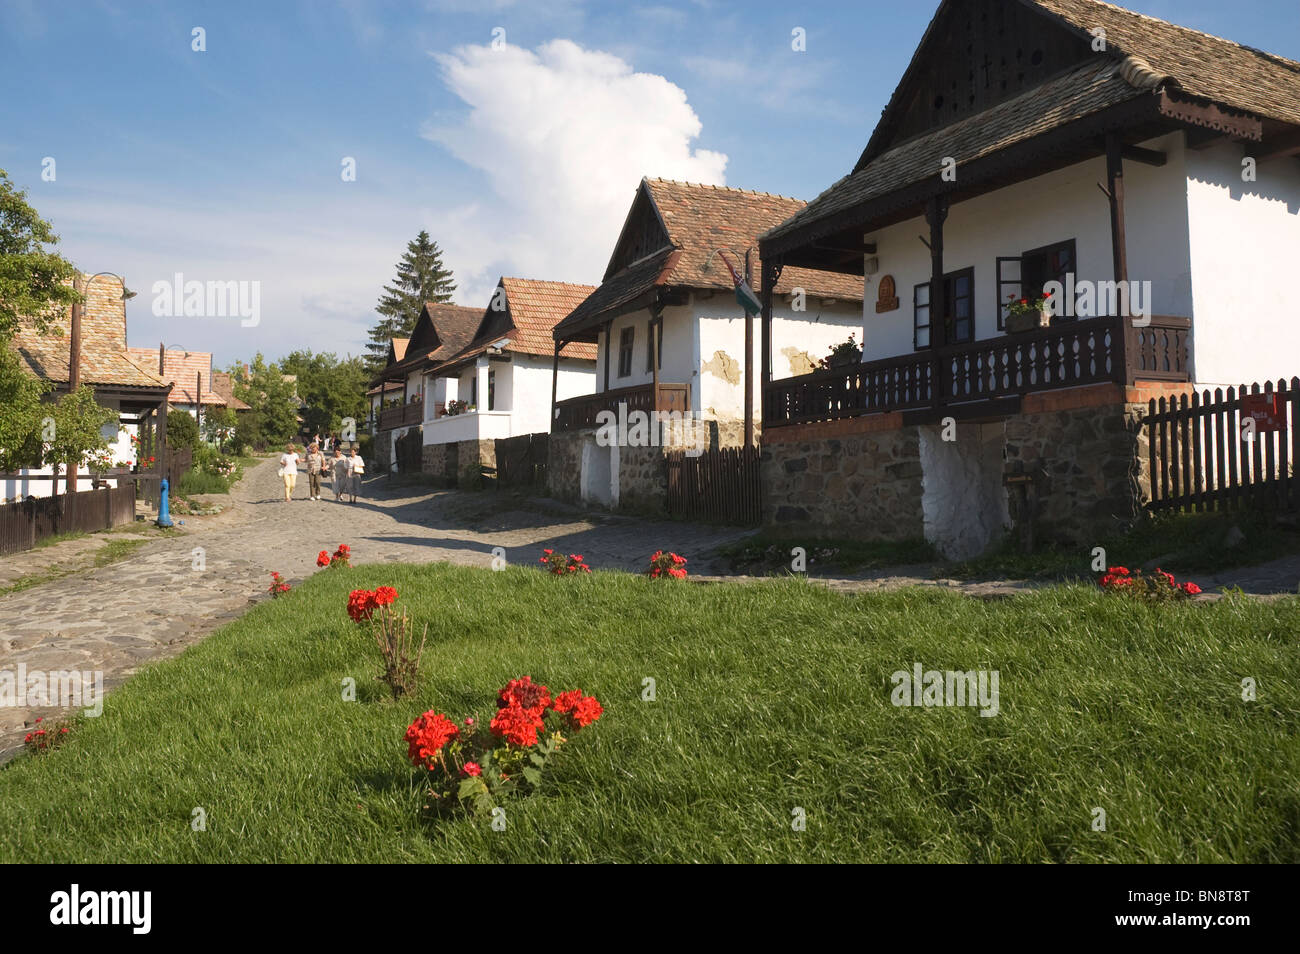 Elk190-2851 Hungary, Holloko, traditional village, row of farmhouses decorated with geraniums Stock Photo